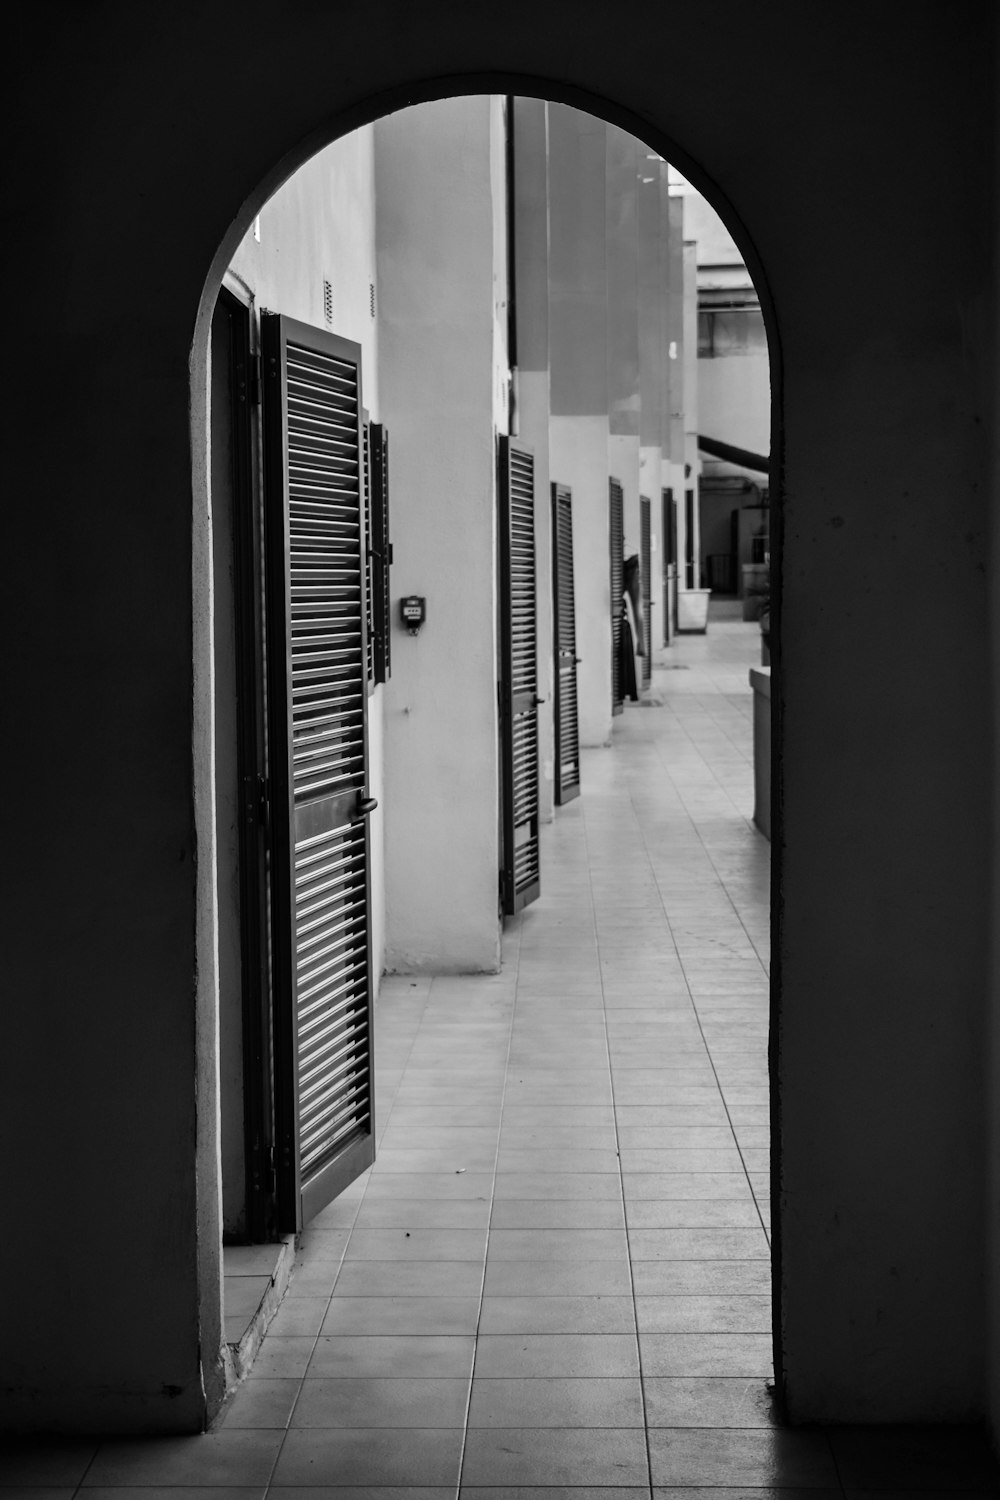 grayscale photography of wooden doors